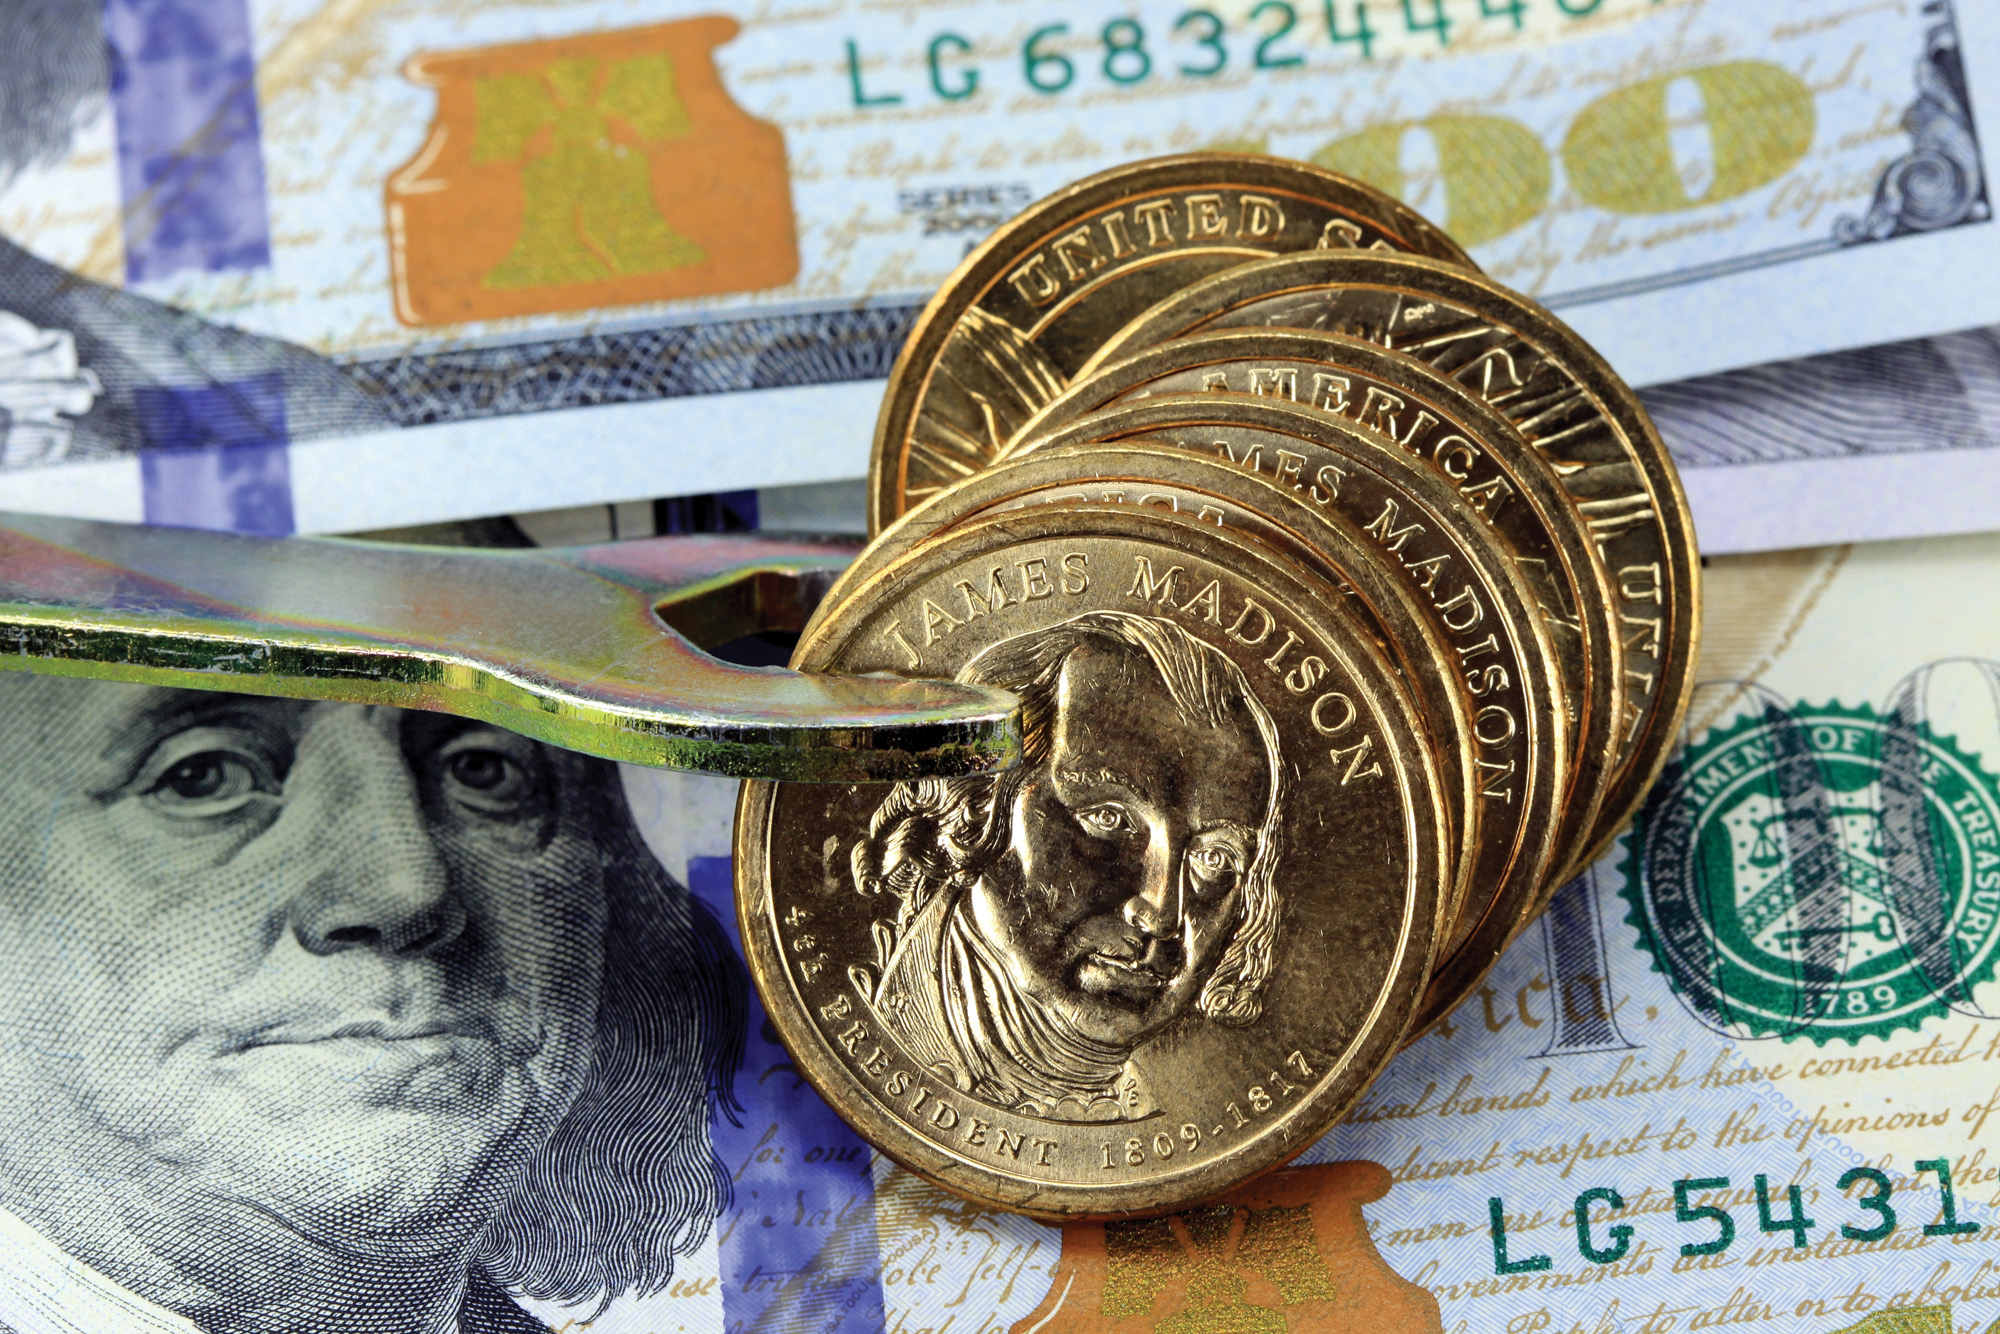 A colorful montage of paper money and gold coins, with a wrench being “applied” to the coins.